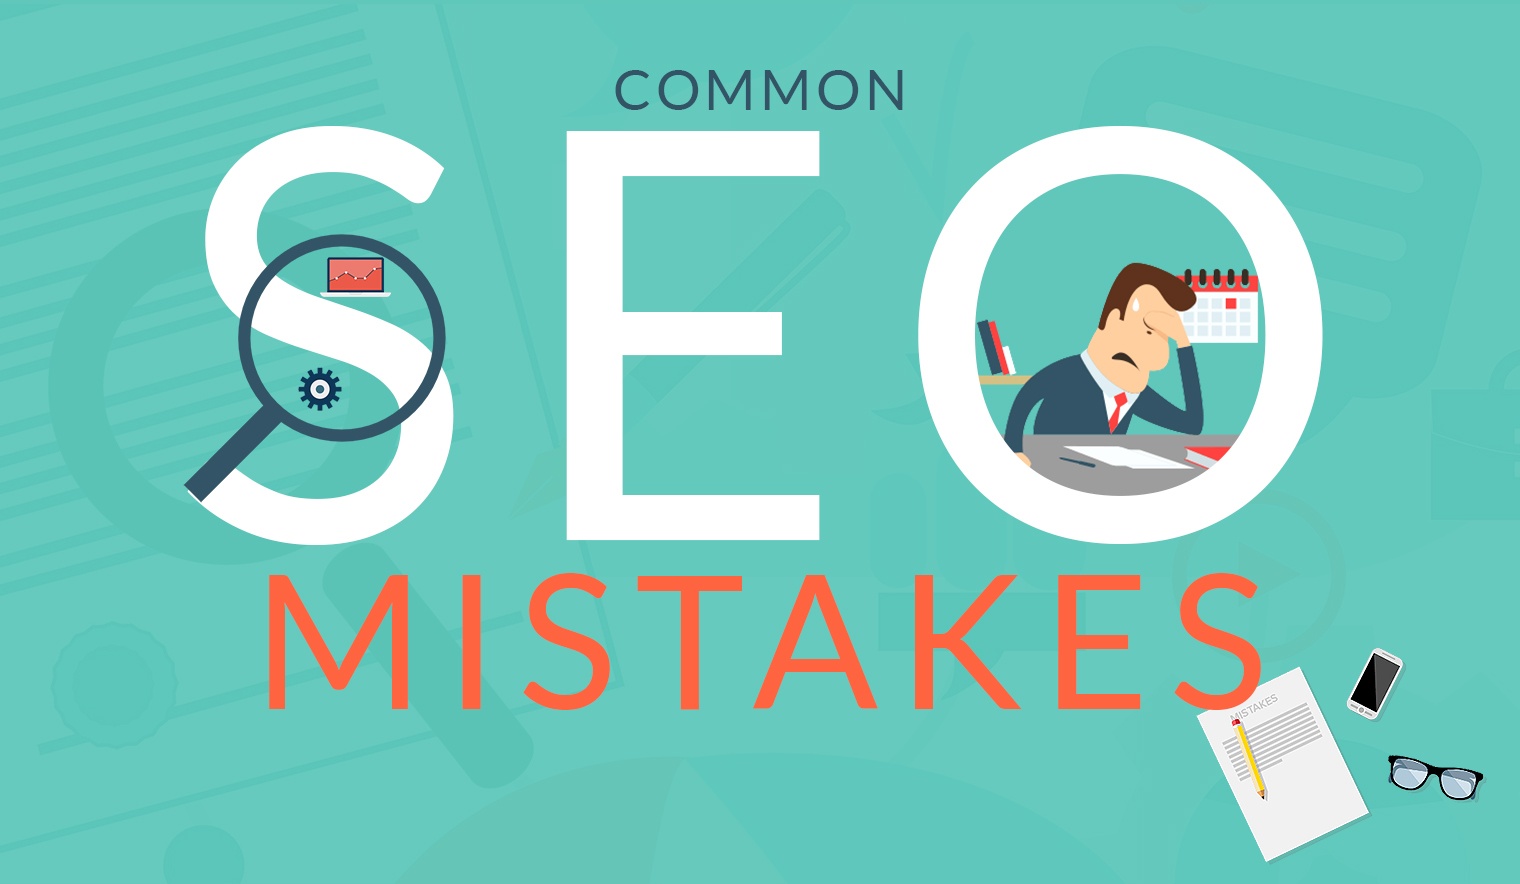 Top 6 SEO Most Common Mistakes To Avoid